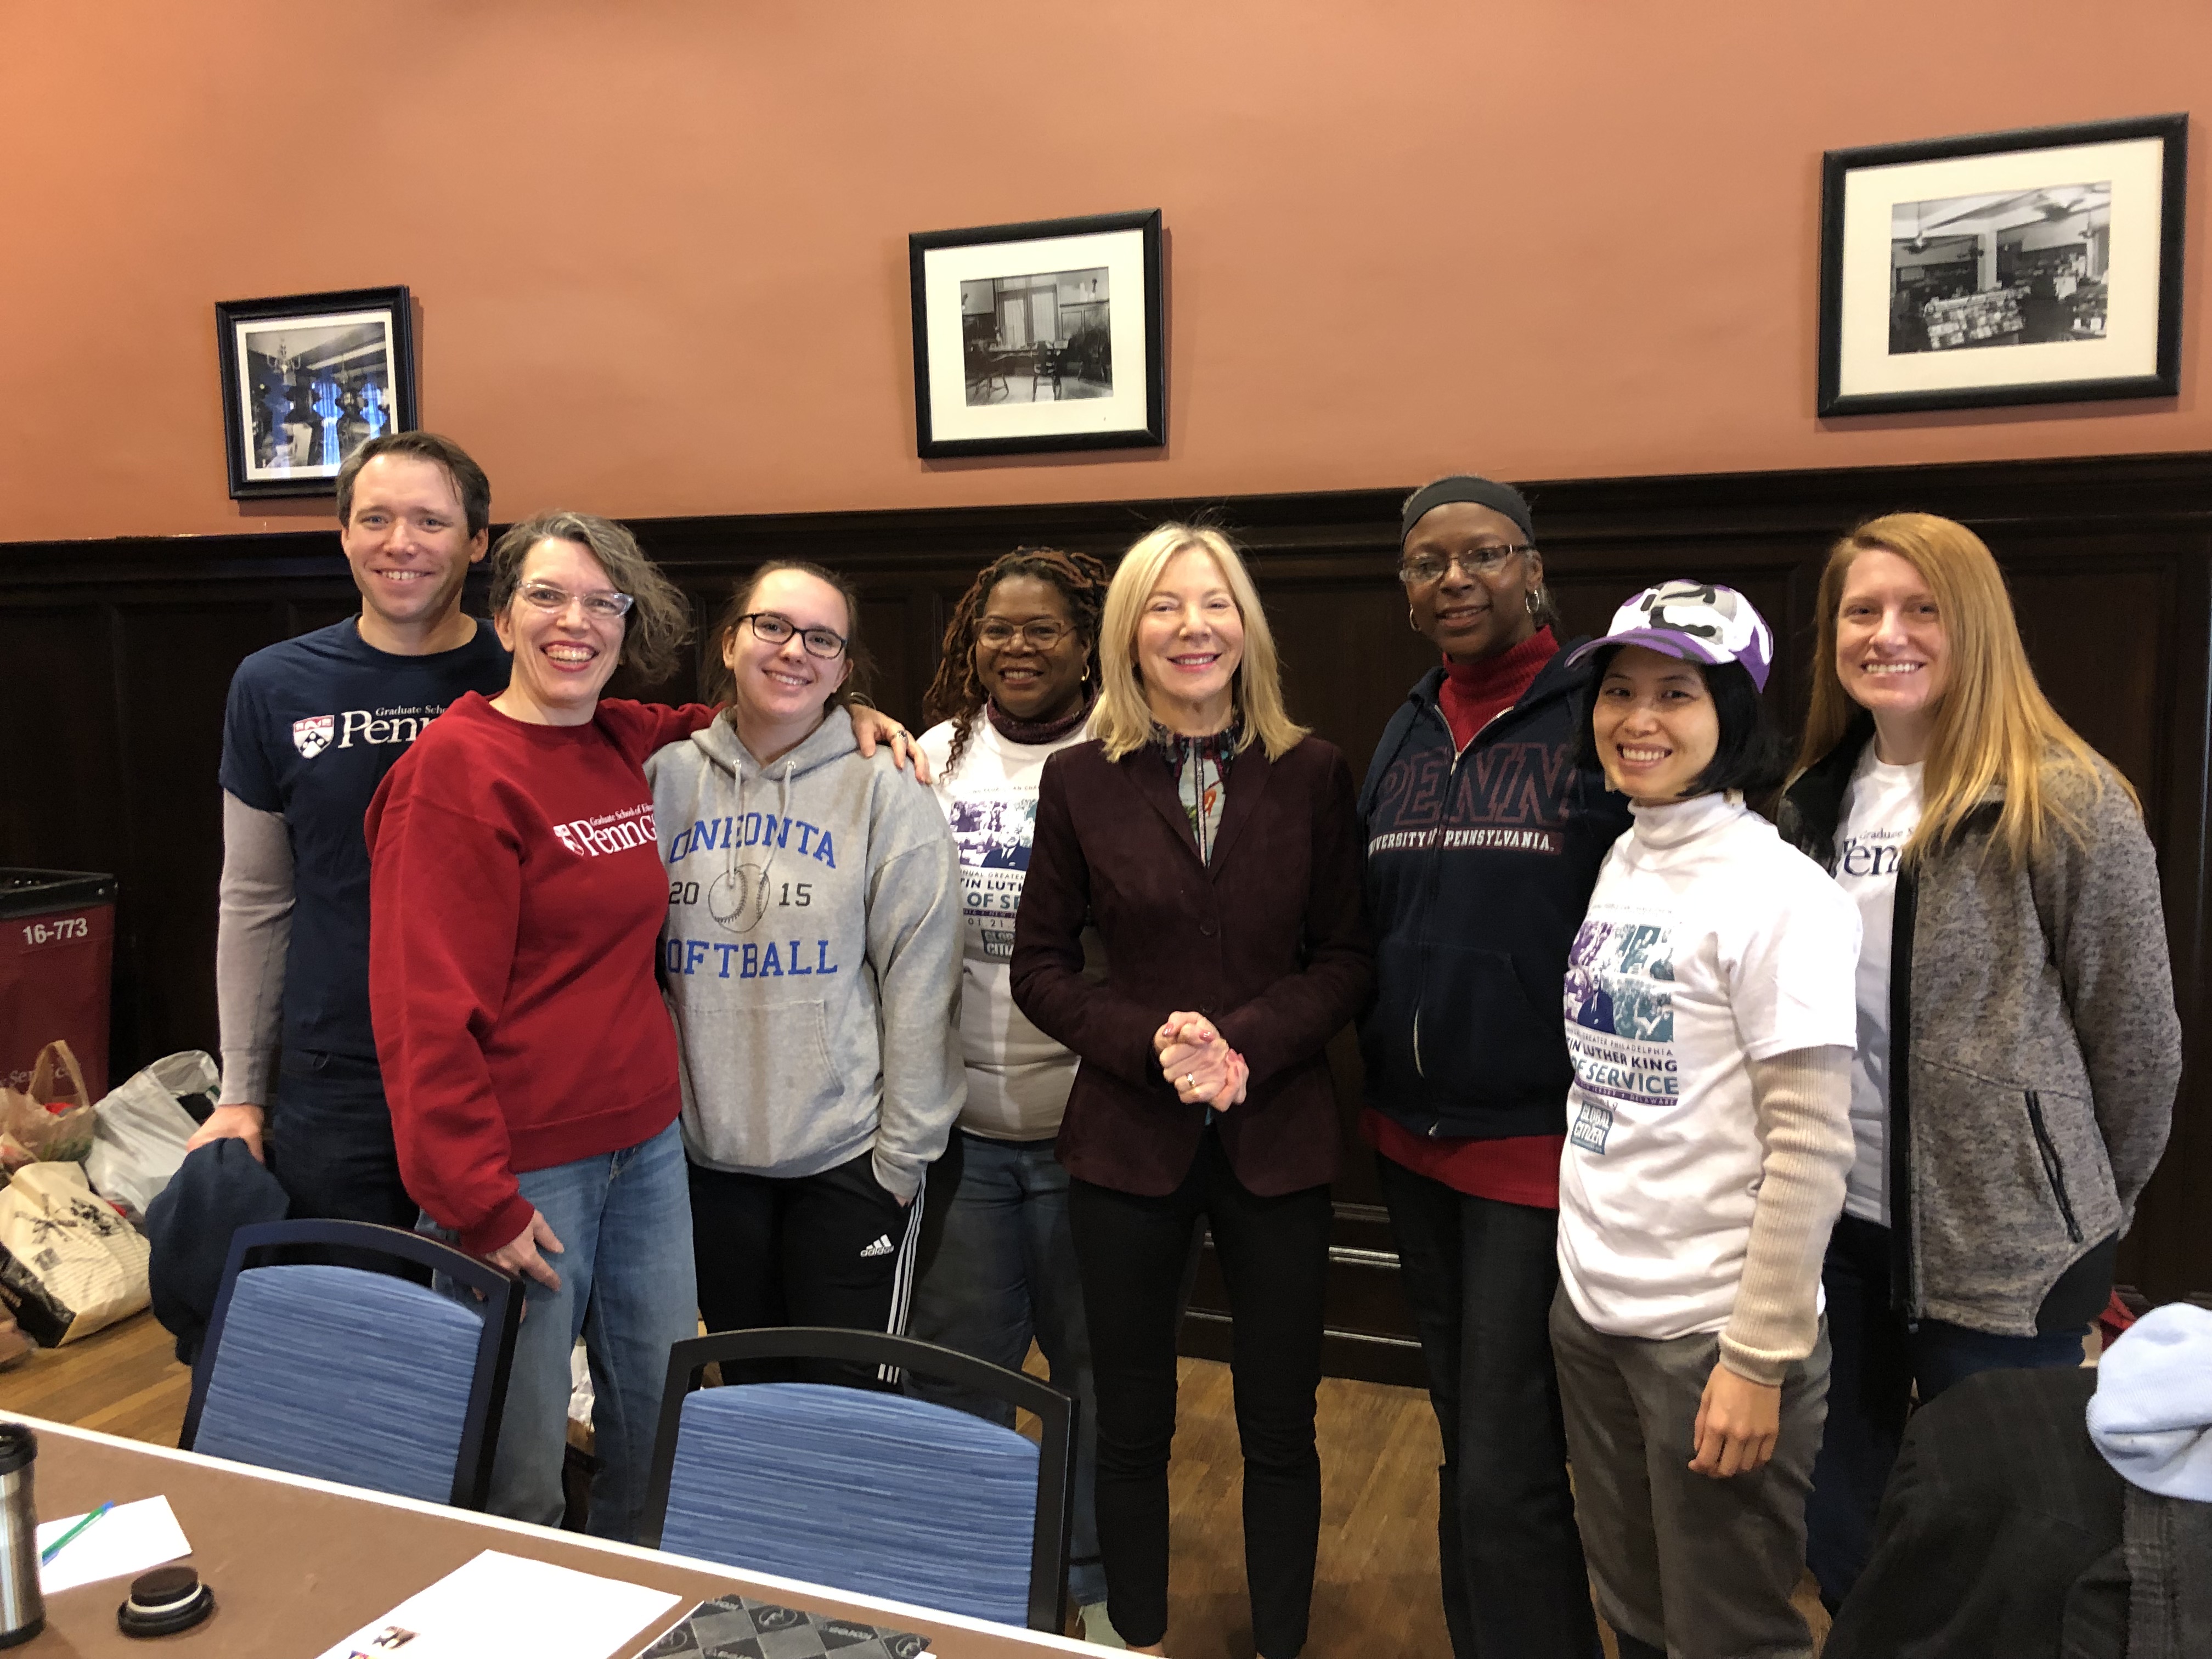 Amy Gutmann with Penn students and staff